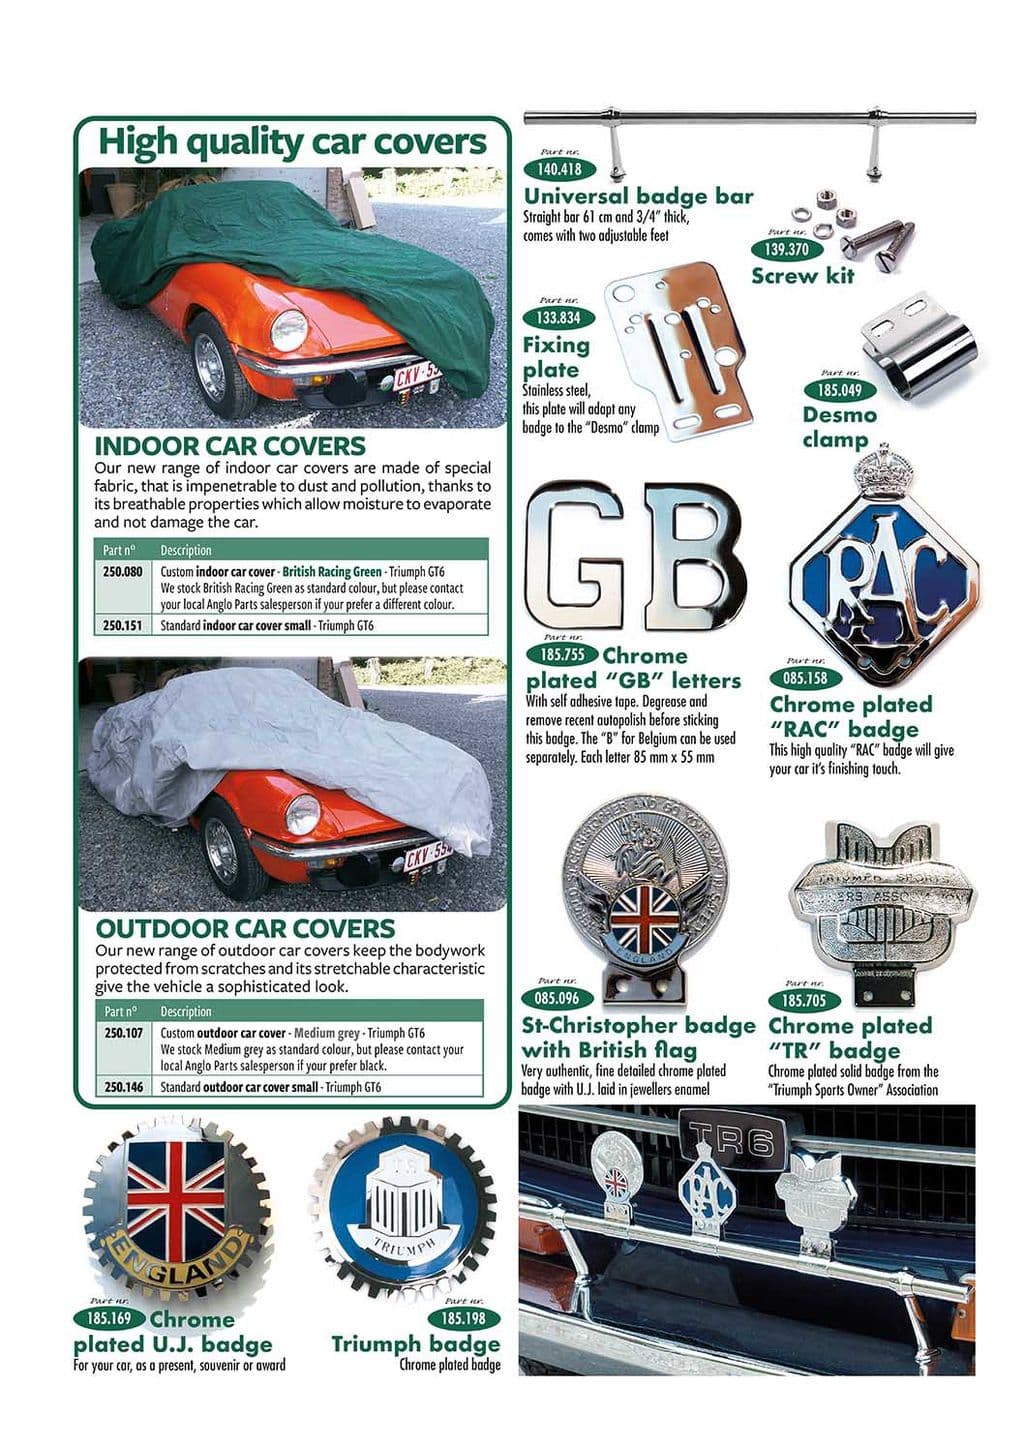 Car covers & badges - Decals & badges - Body & Chassis - Jaguar E-type 3.8 - 4.2 - 5.3 V12 1961-1974 - Car covers & badges - 1